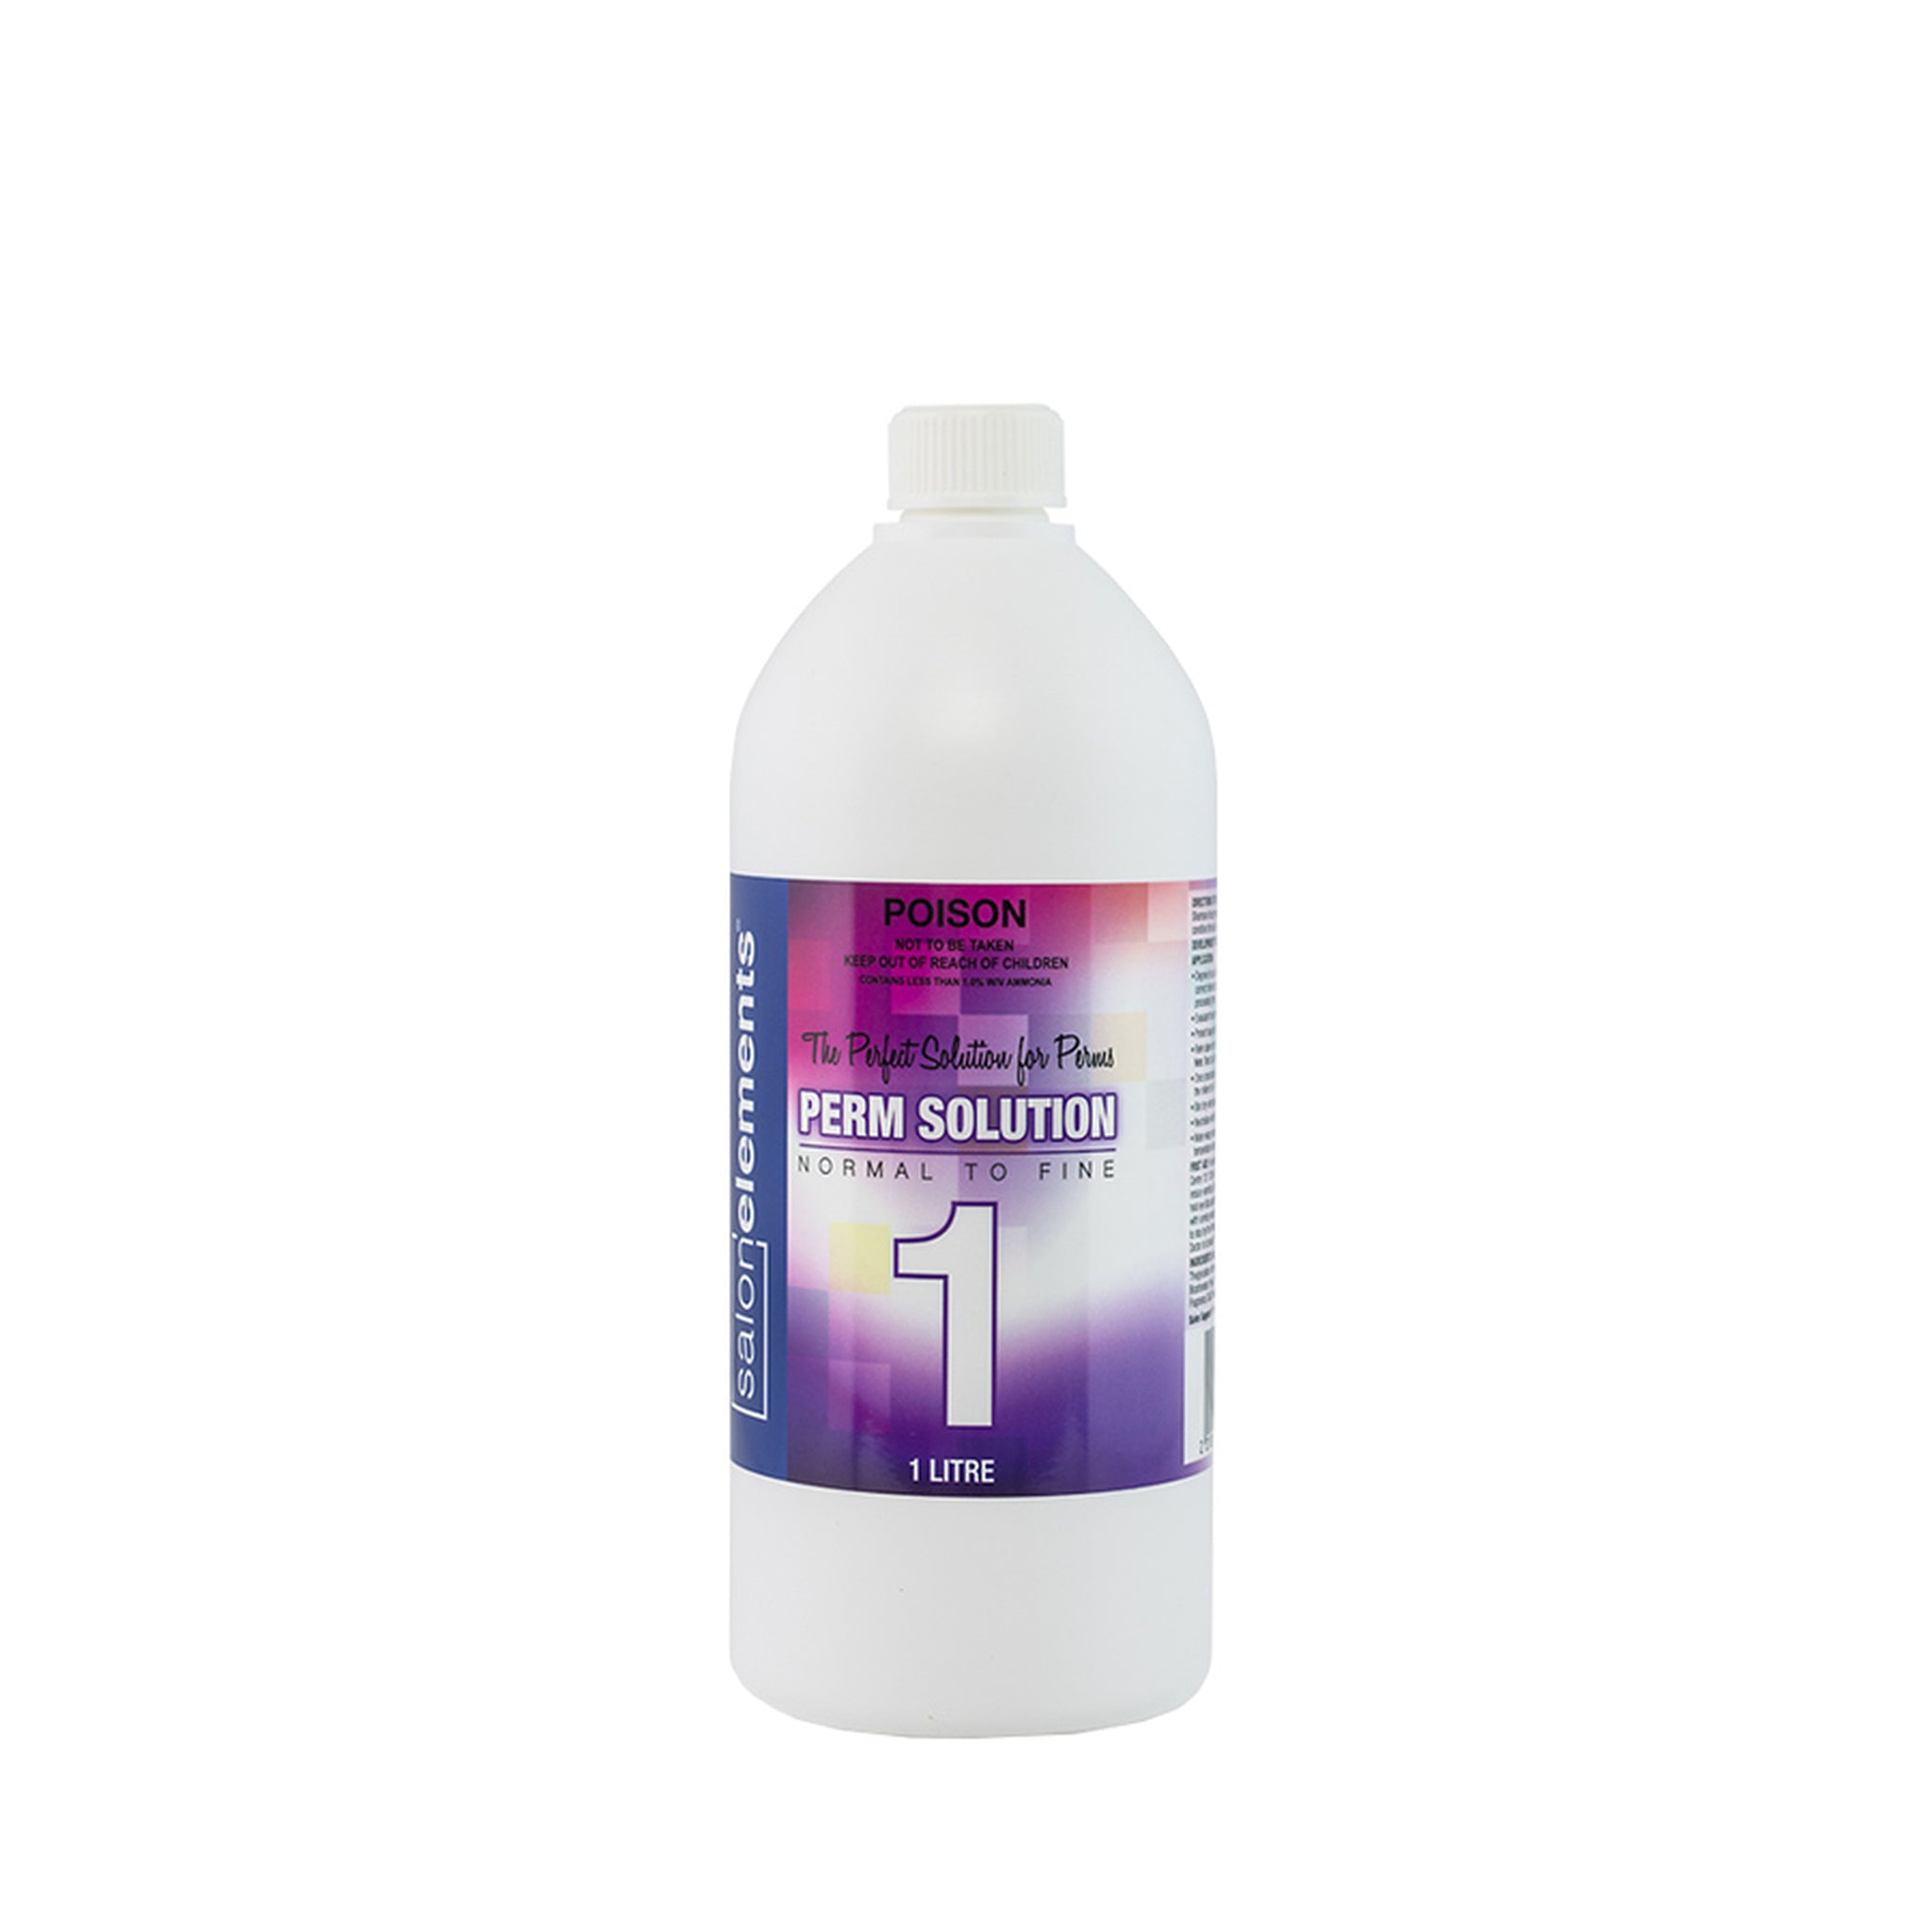 SALON ELEMENTS 1 1LTR NORMAL TO FINE HAIR